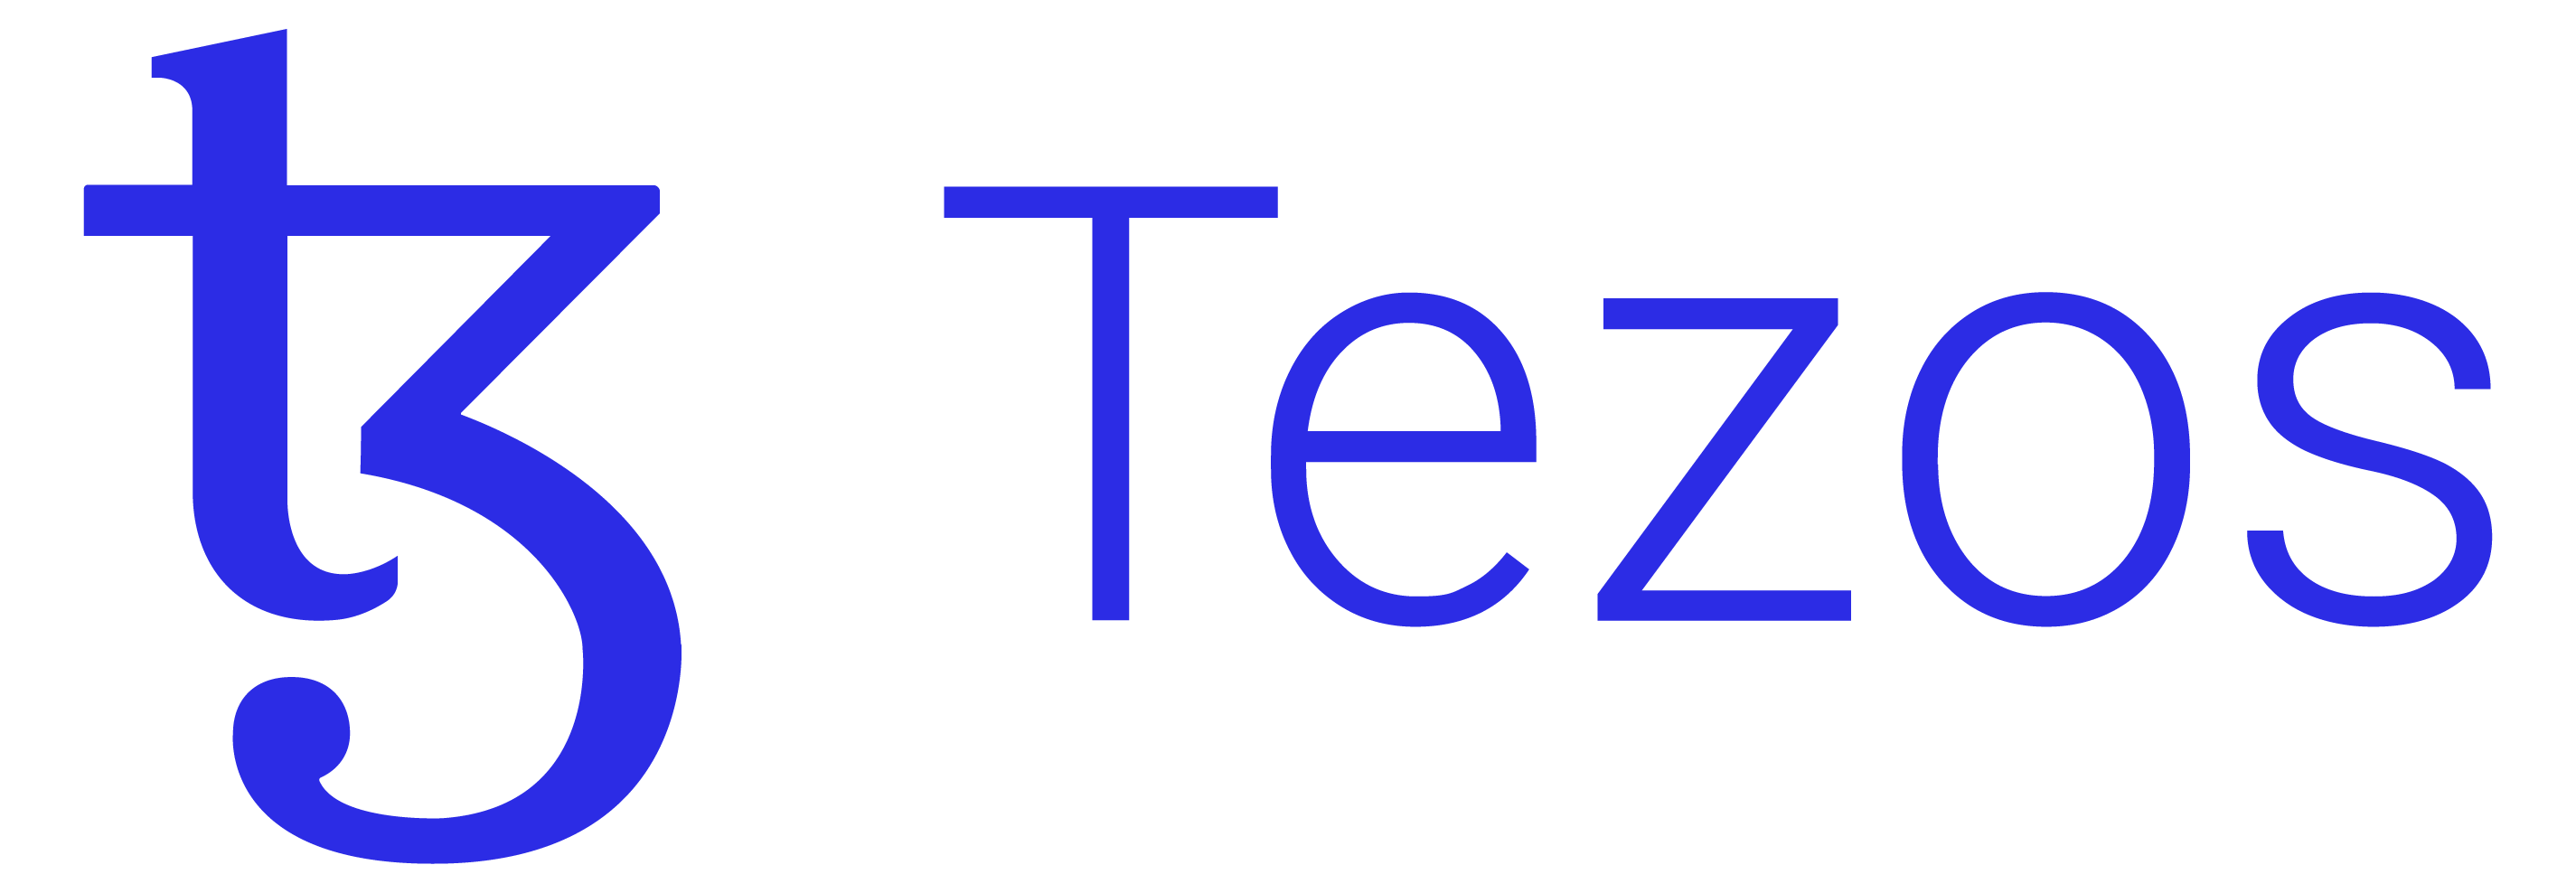 logo for Tezos rendered in blue